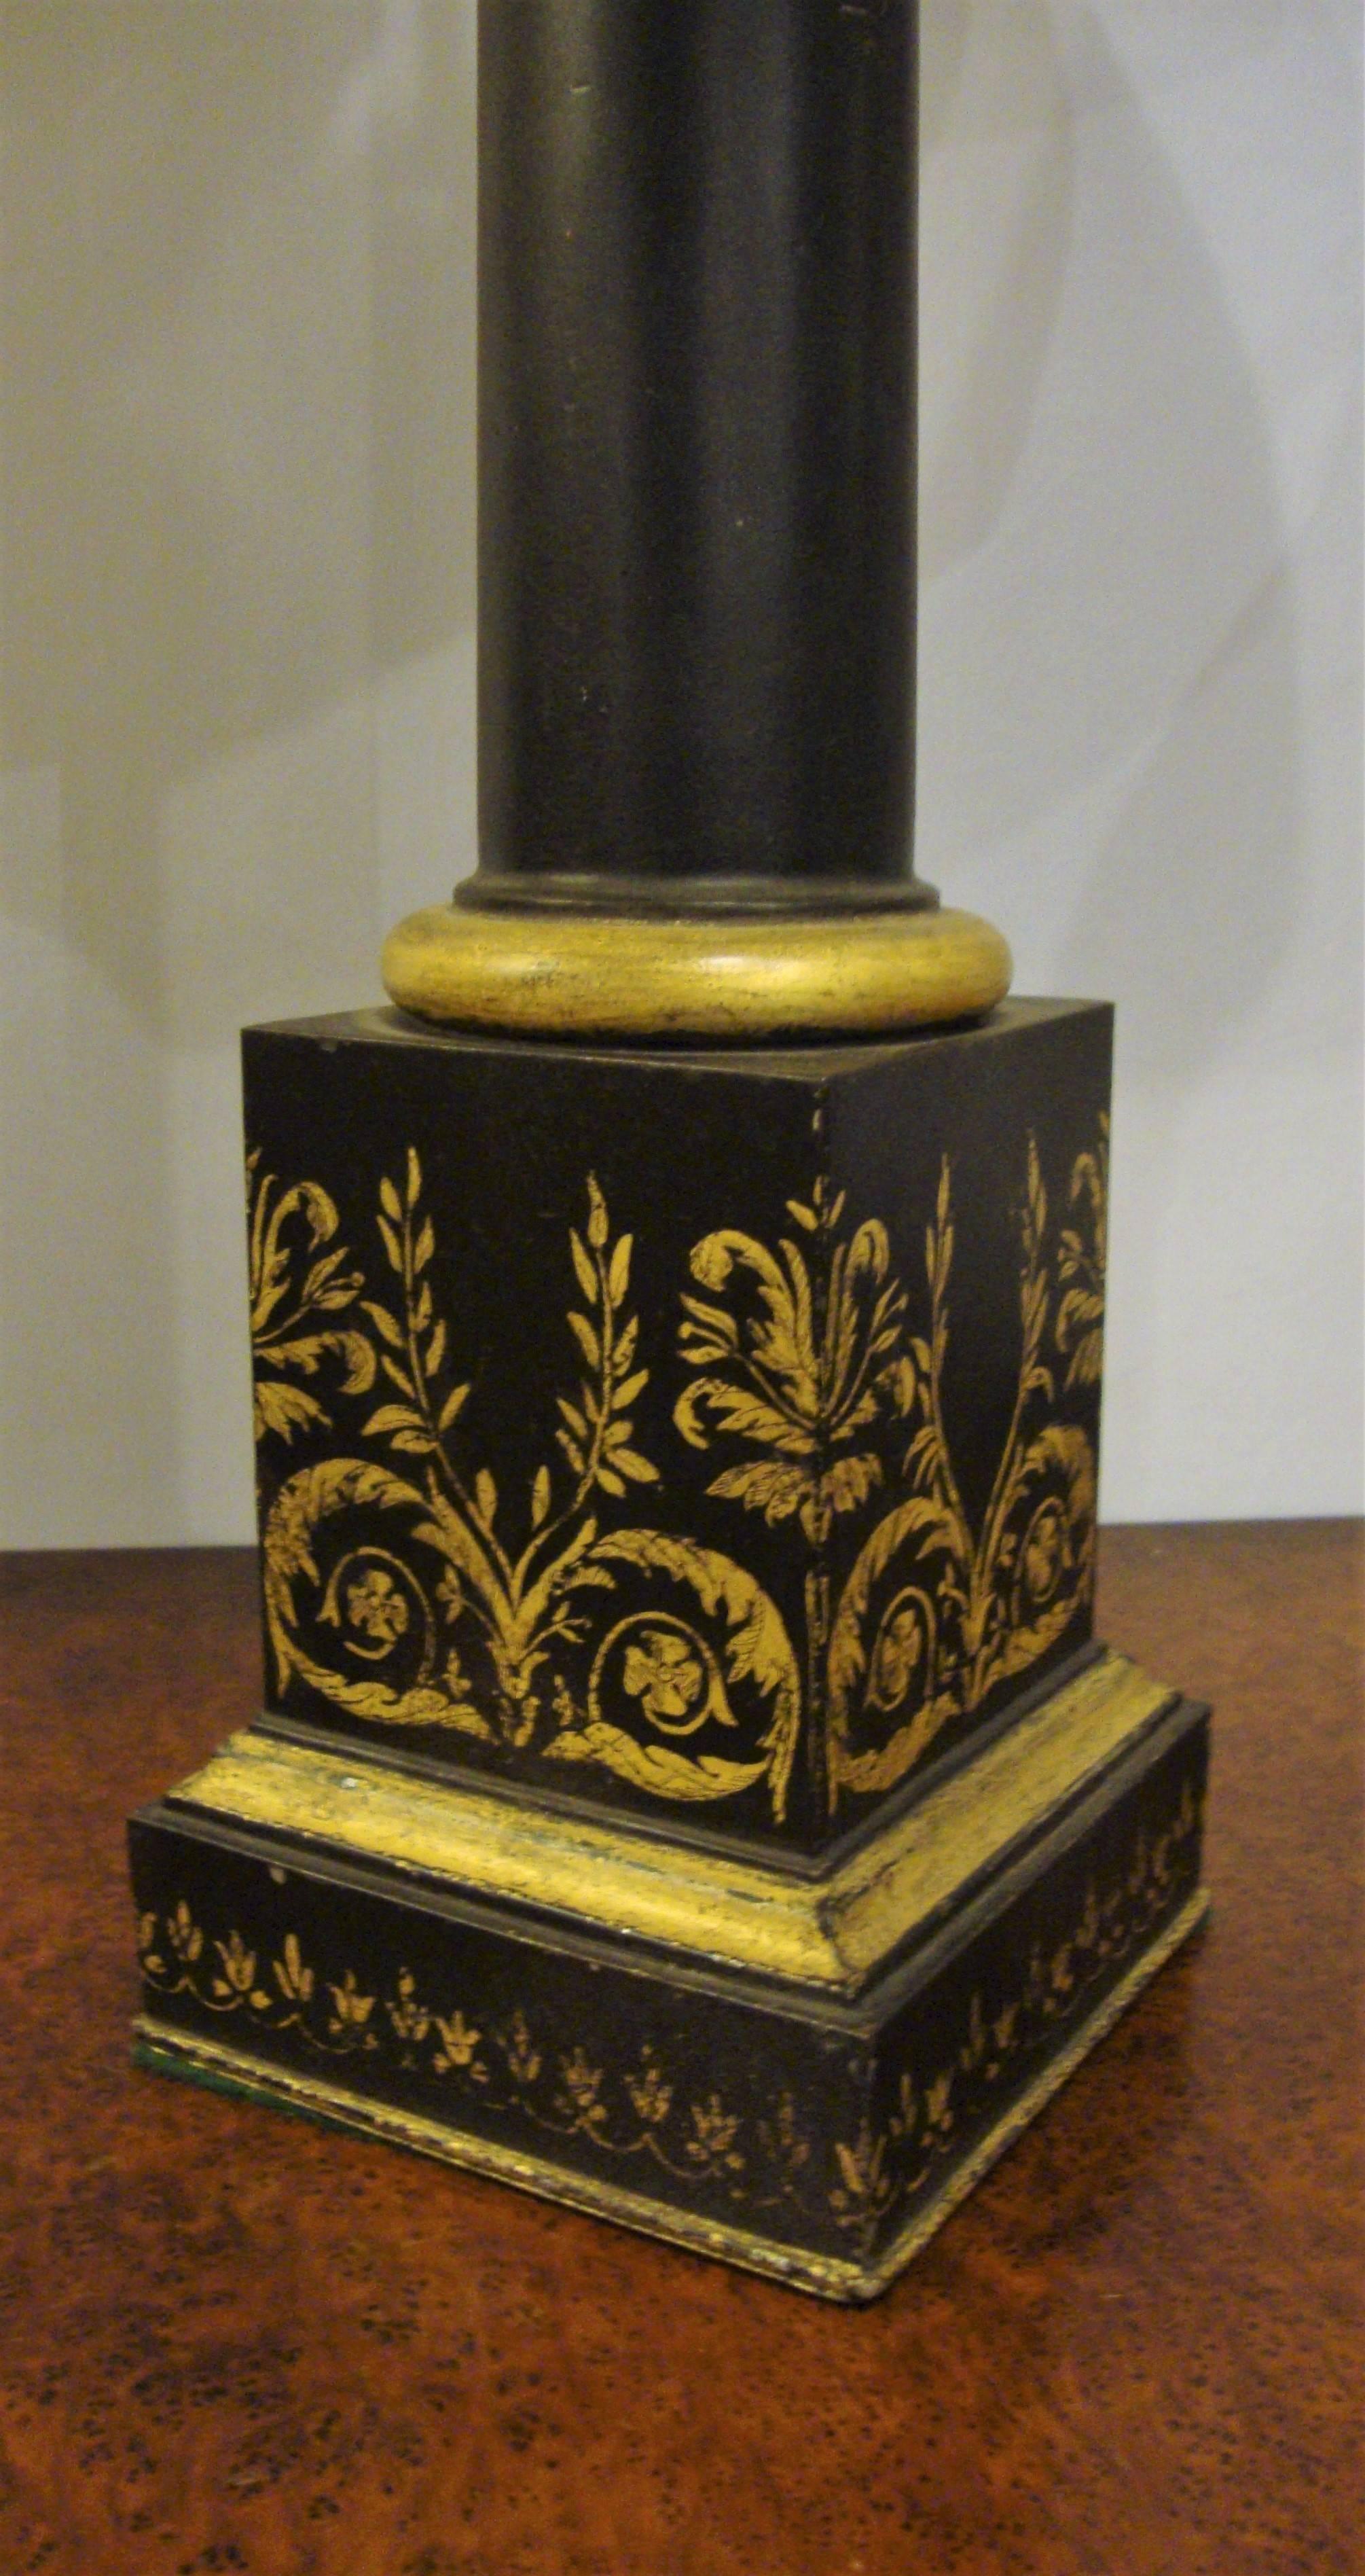 20th Century Pair of Antique Tole Painted Ebonized and Gilt Decorated Empire Style Lamps